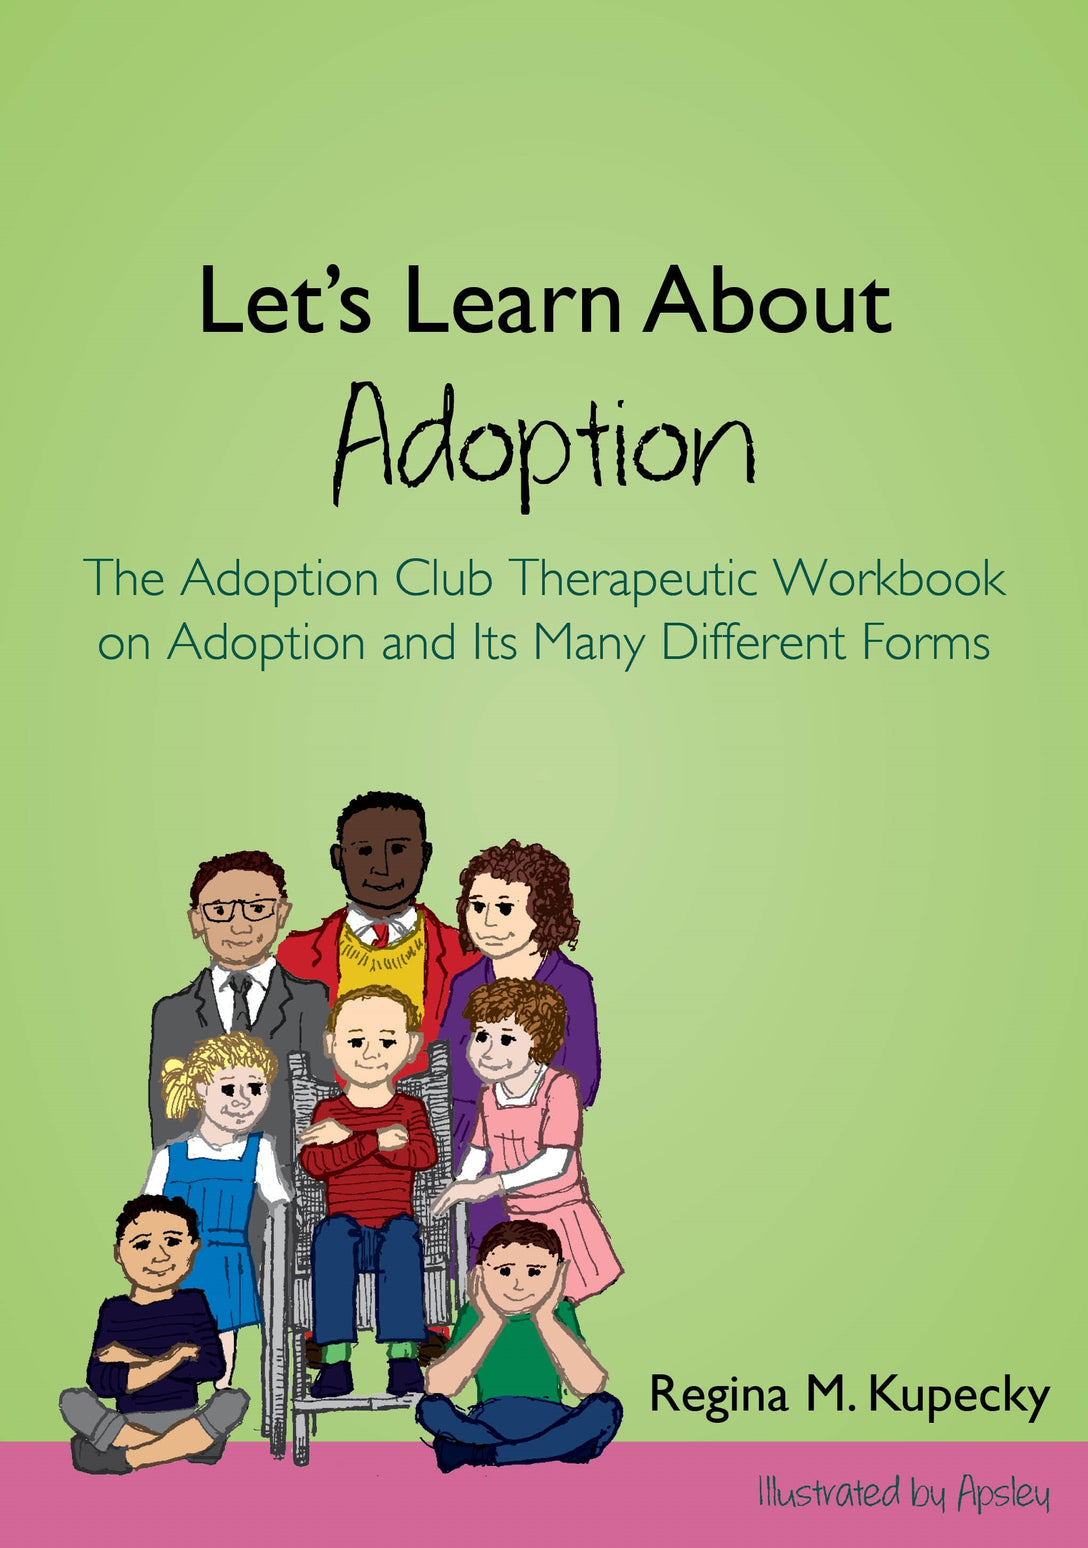 Let's Learn About Adoption by Regina M. Kupecky,  Apsley